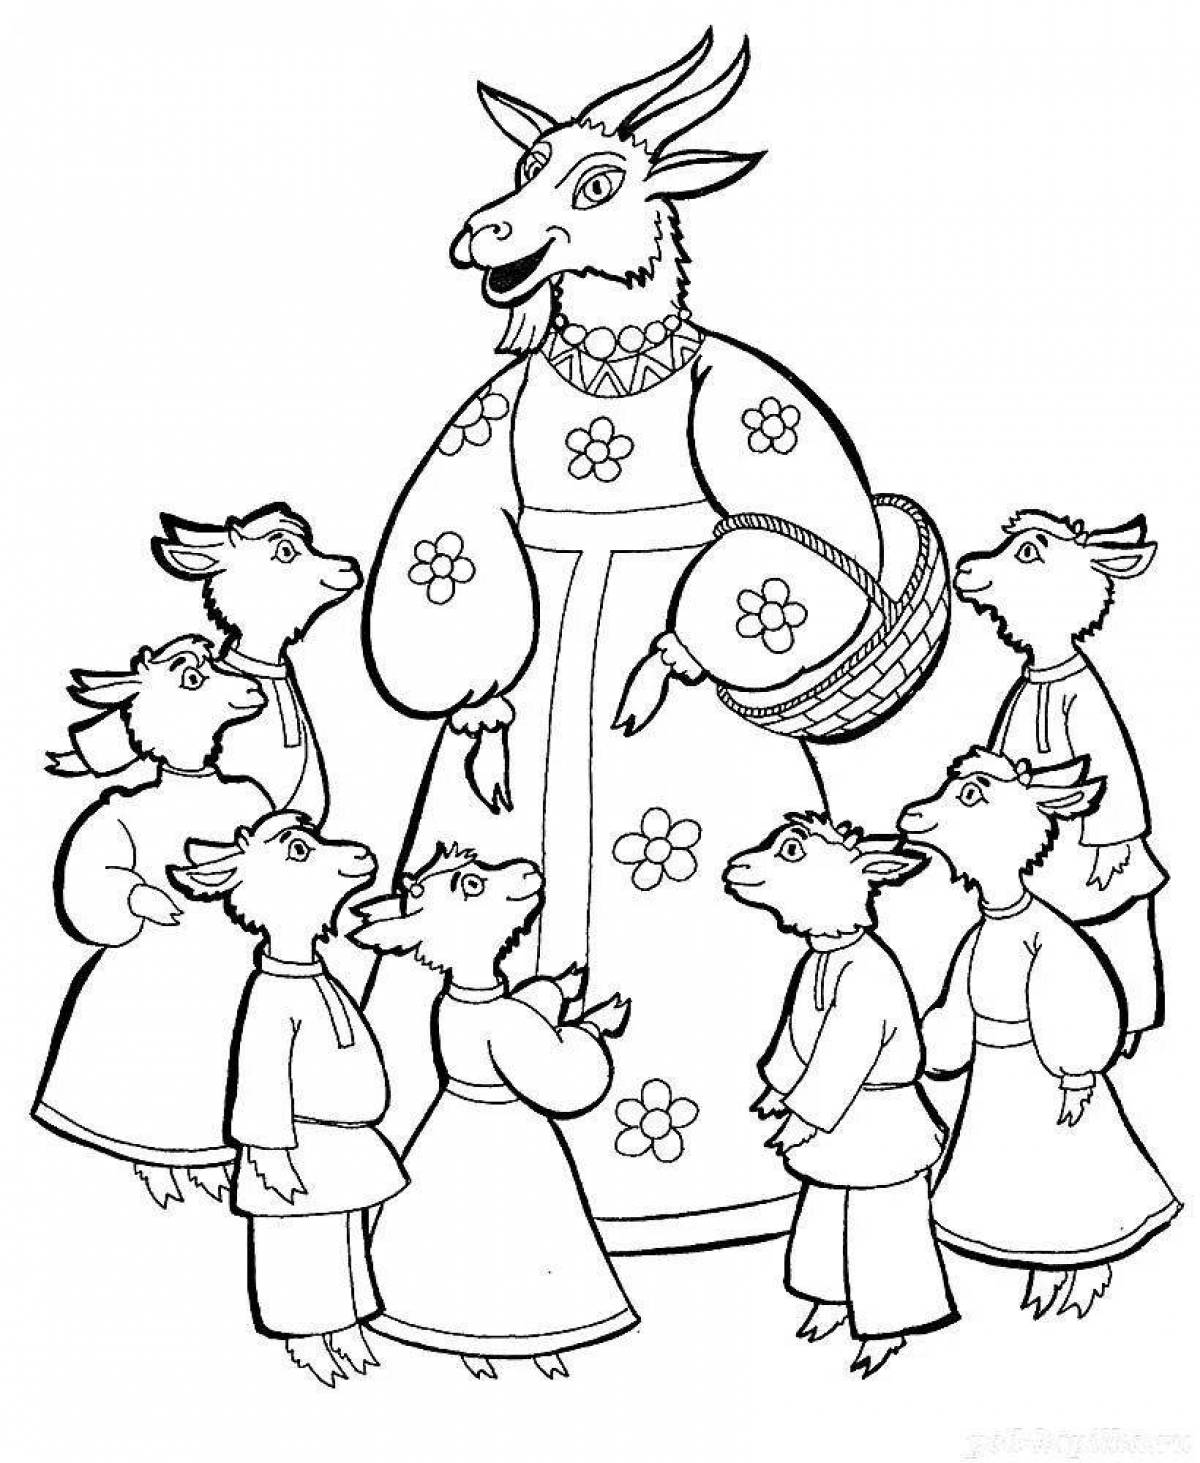 Coloring book exquisite goat and seven kids